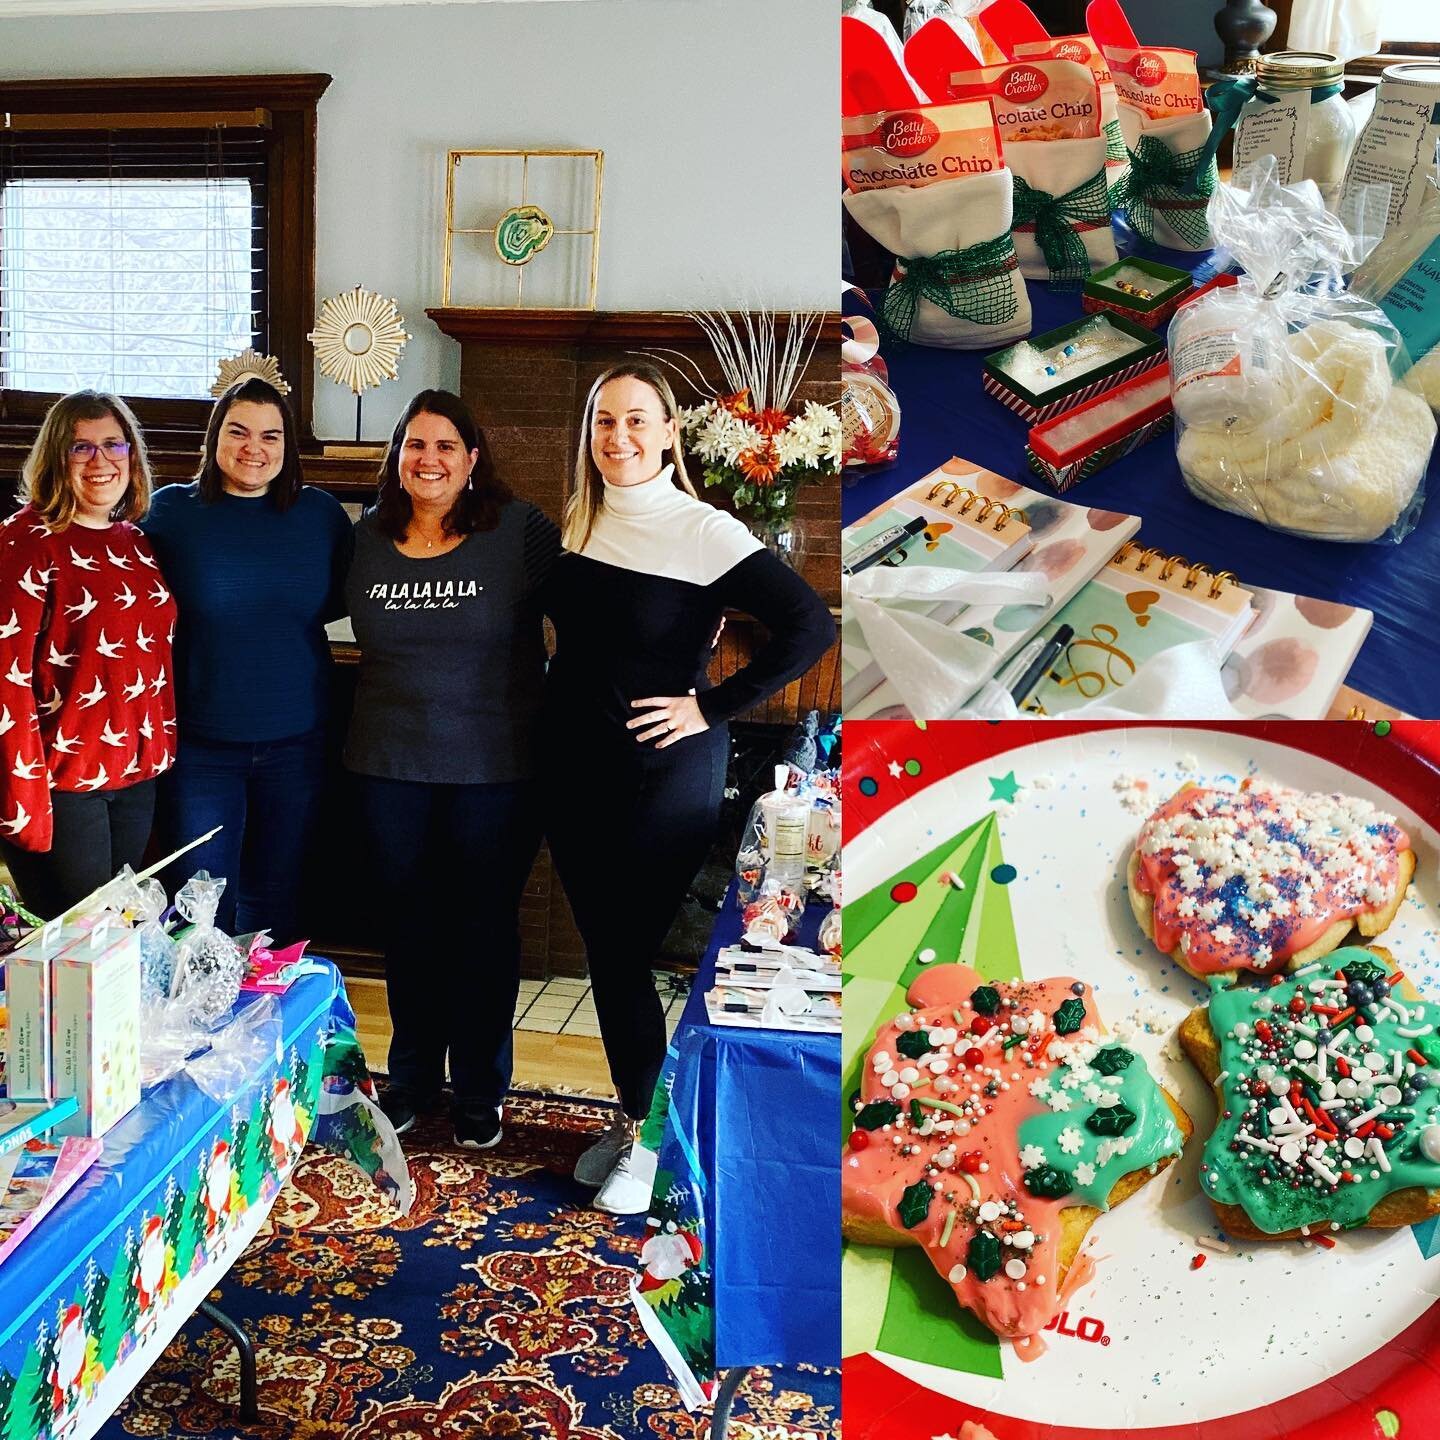 Last week, four volunteers from Aisle Rocket stopped by the shelter to put on a Santa's Workshop. Kids were able to pick out gifts for themselves and their loved ones and participate in decorating delicious cookies! Thank you, @aislerocket for bringi